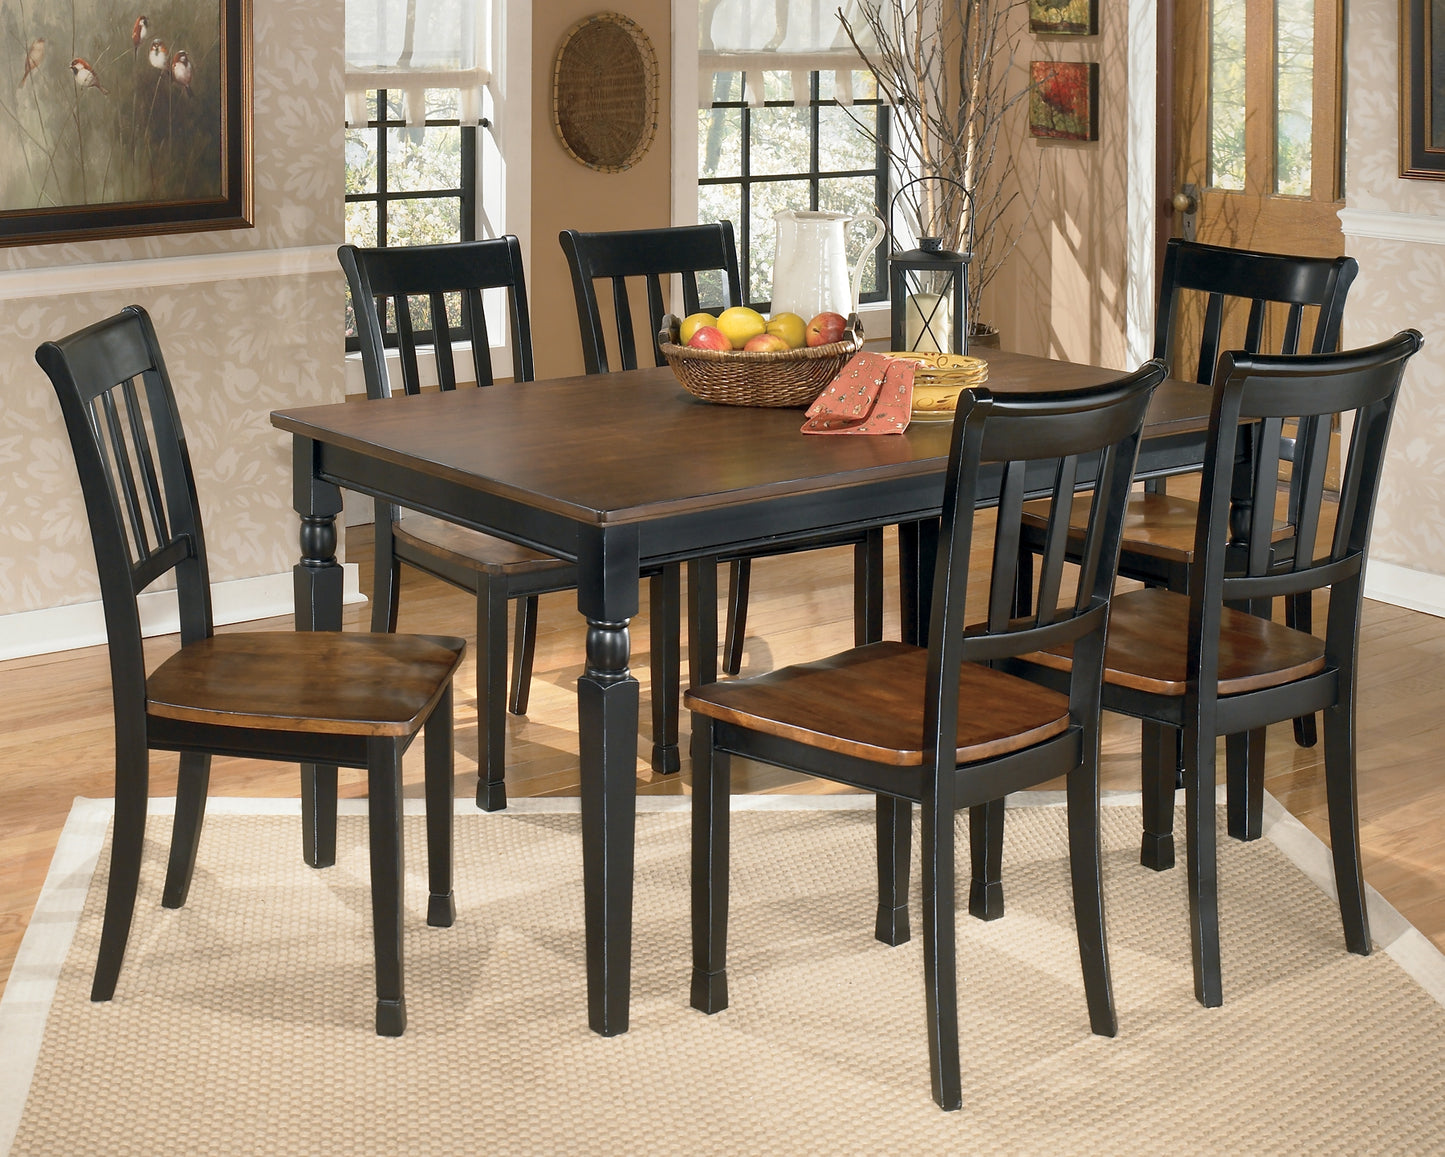 Owingsville Rectangular Dining Room Table